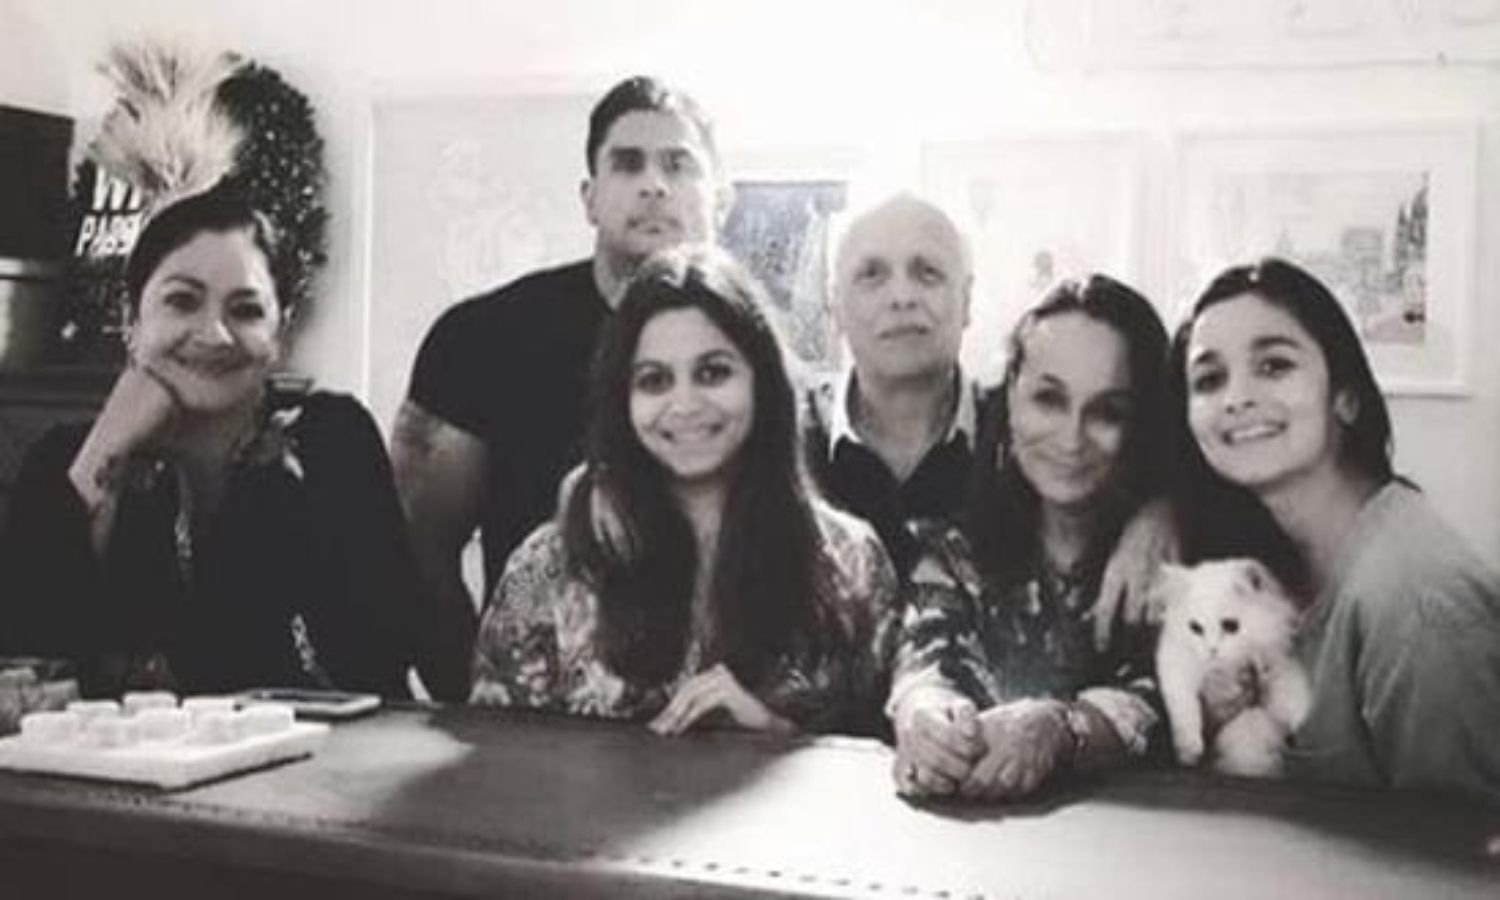 Mahesh Bhatt said that my family will remember me, but they will not be sad for my death